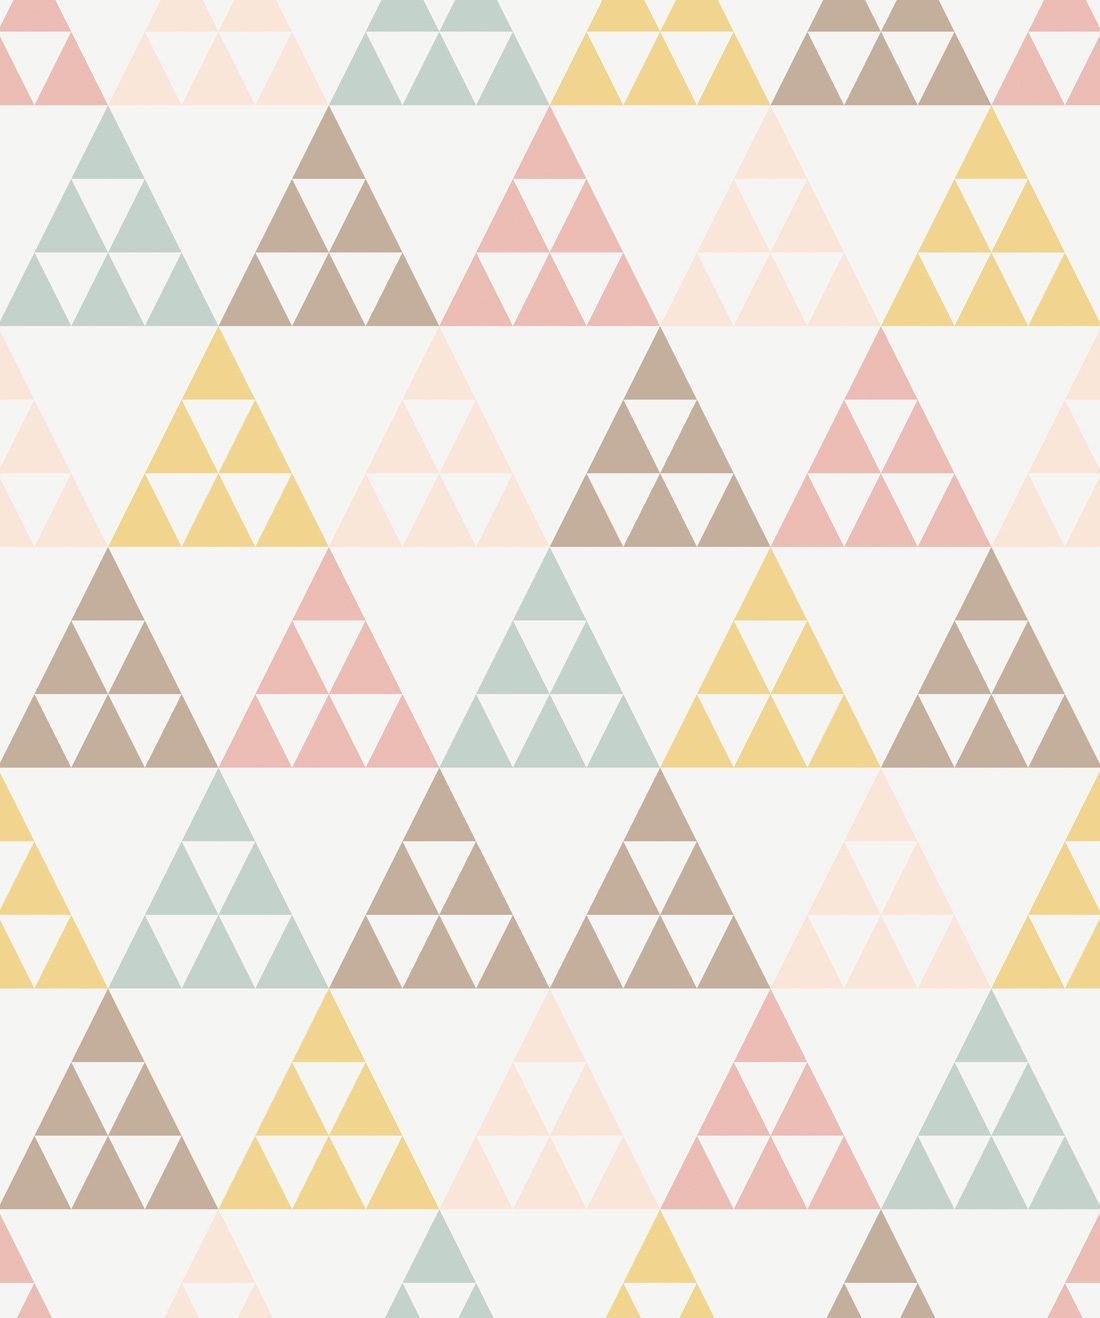 Pastelangles is a dreamy geometric wallpaper